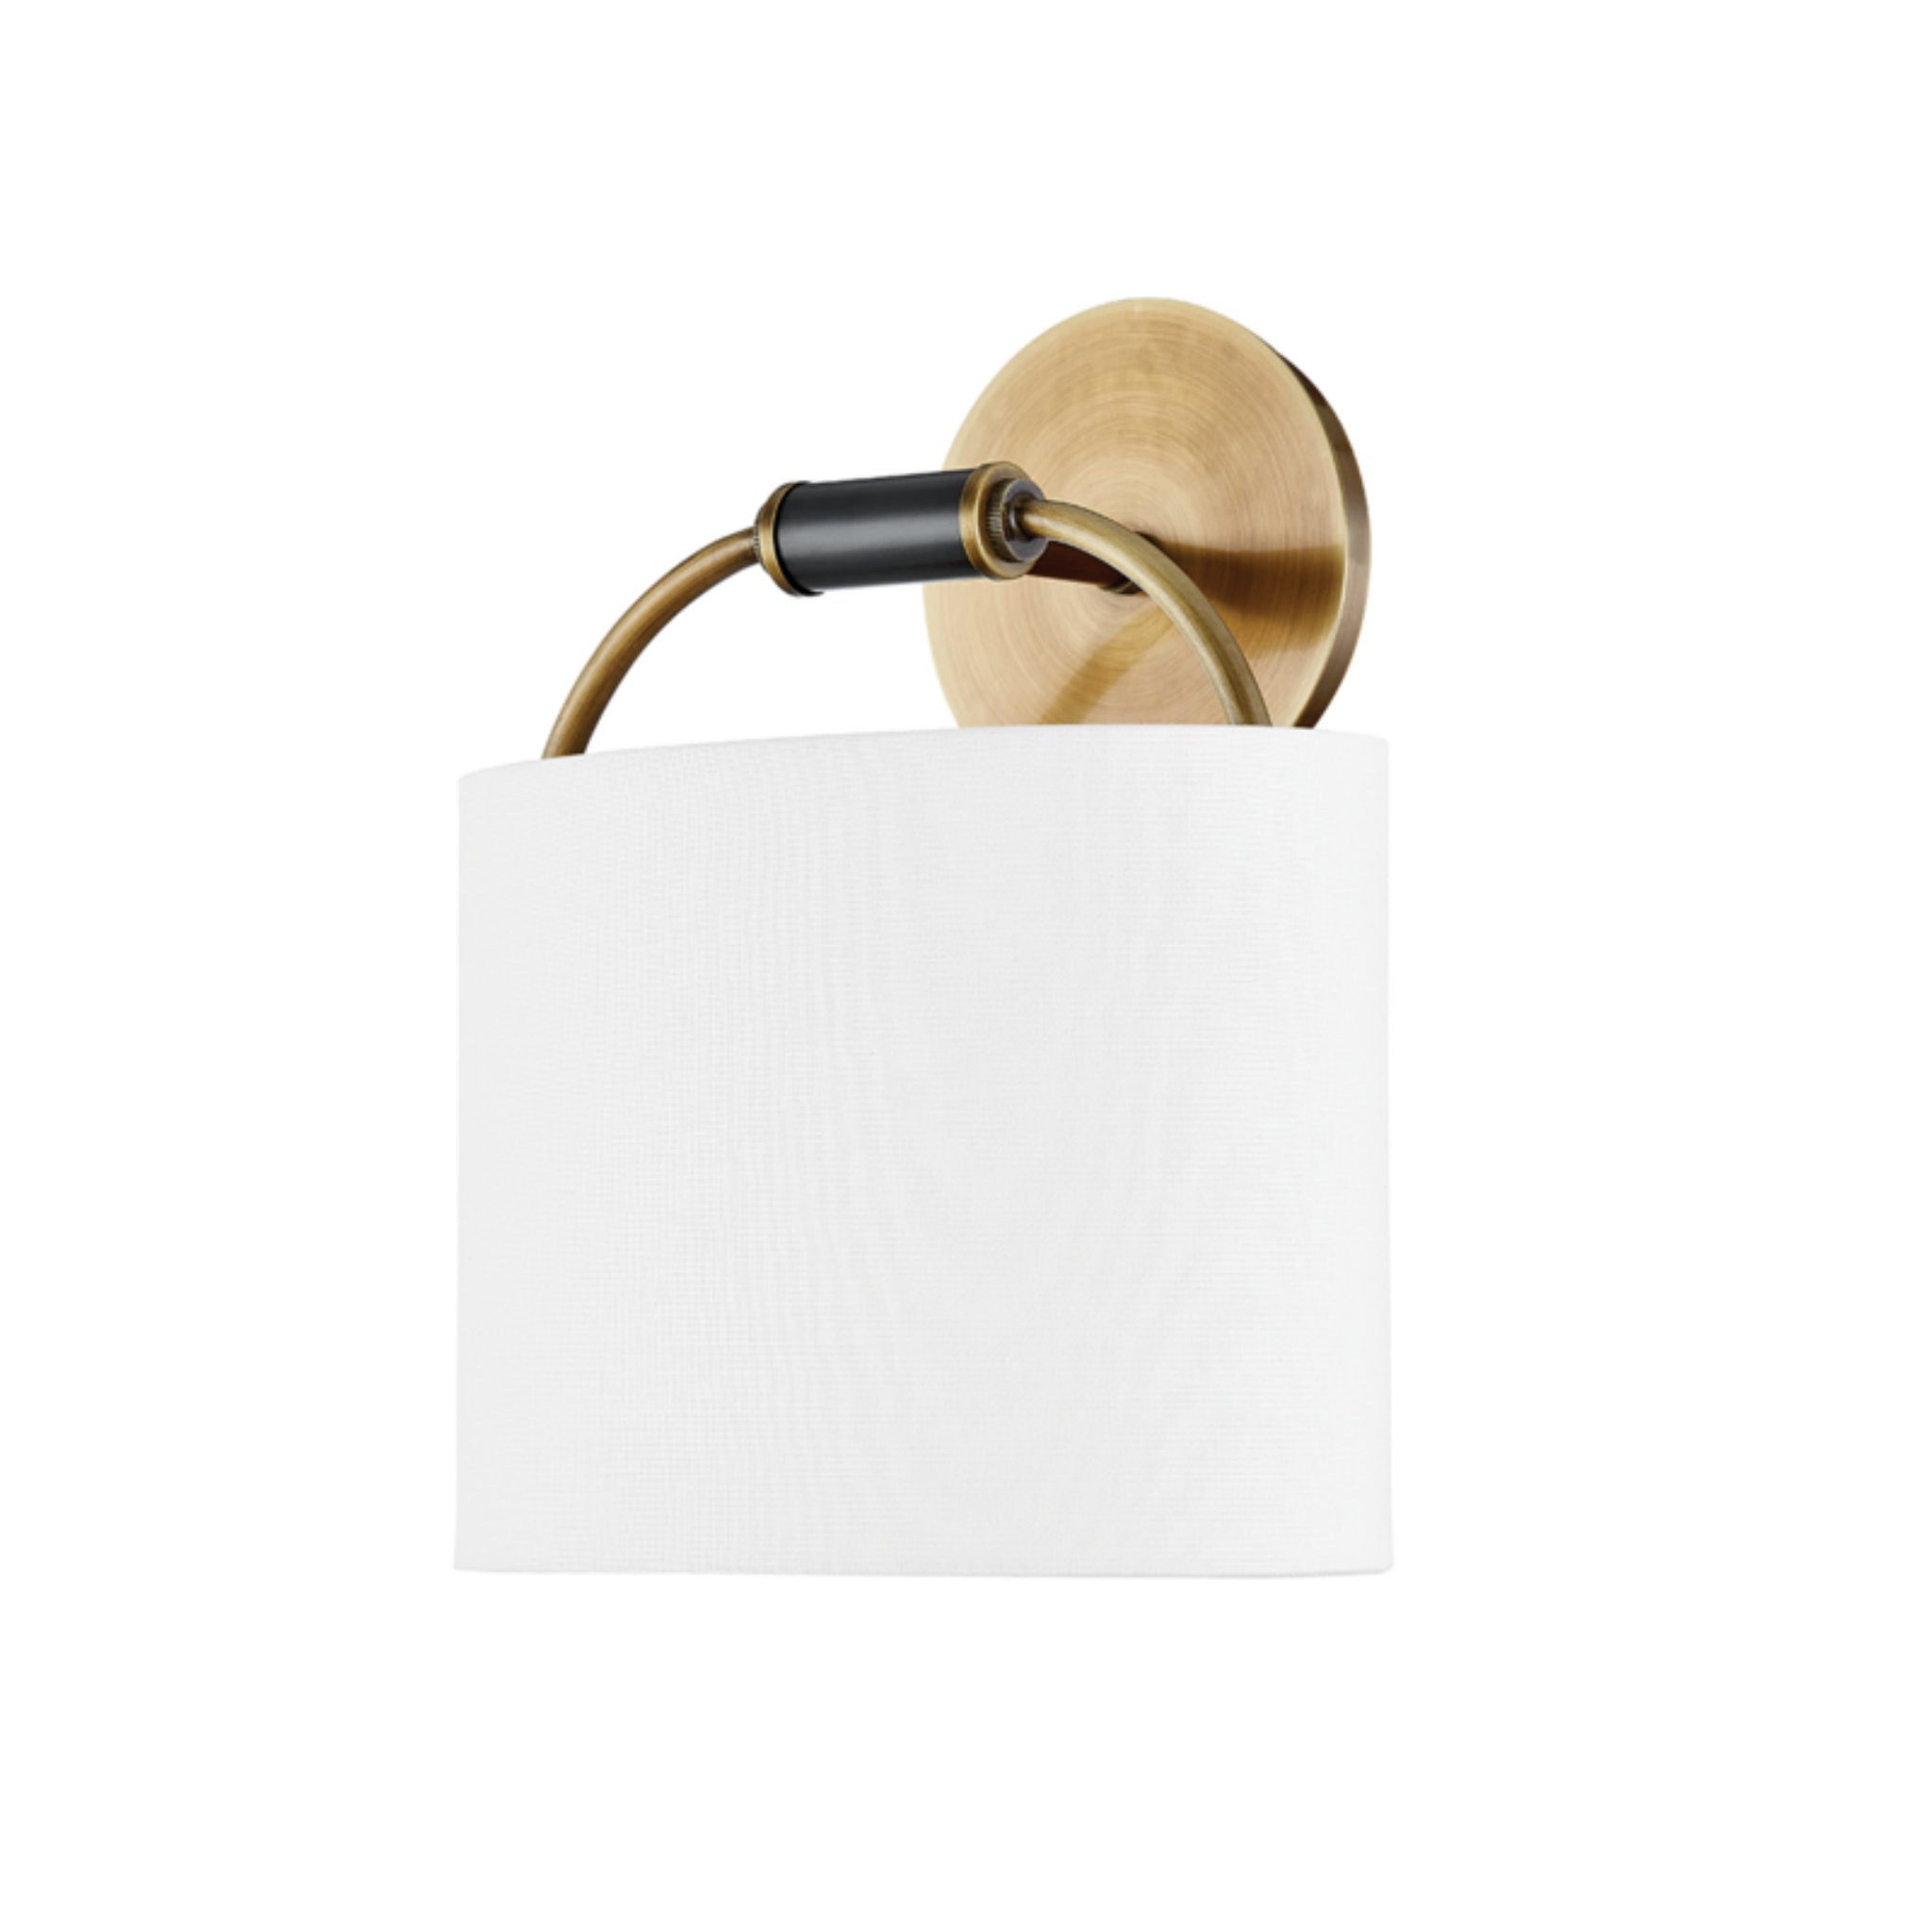 Pete 1 Light Wall Sconce in Patina Brass